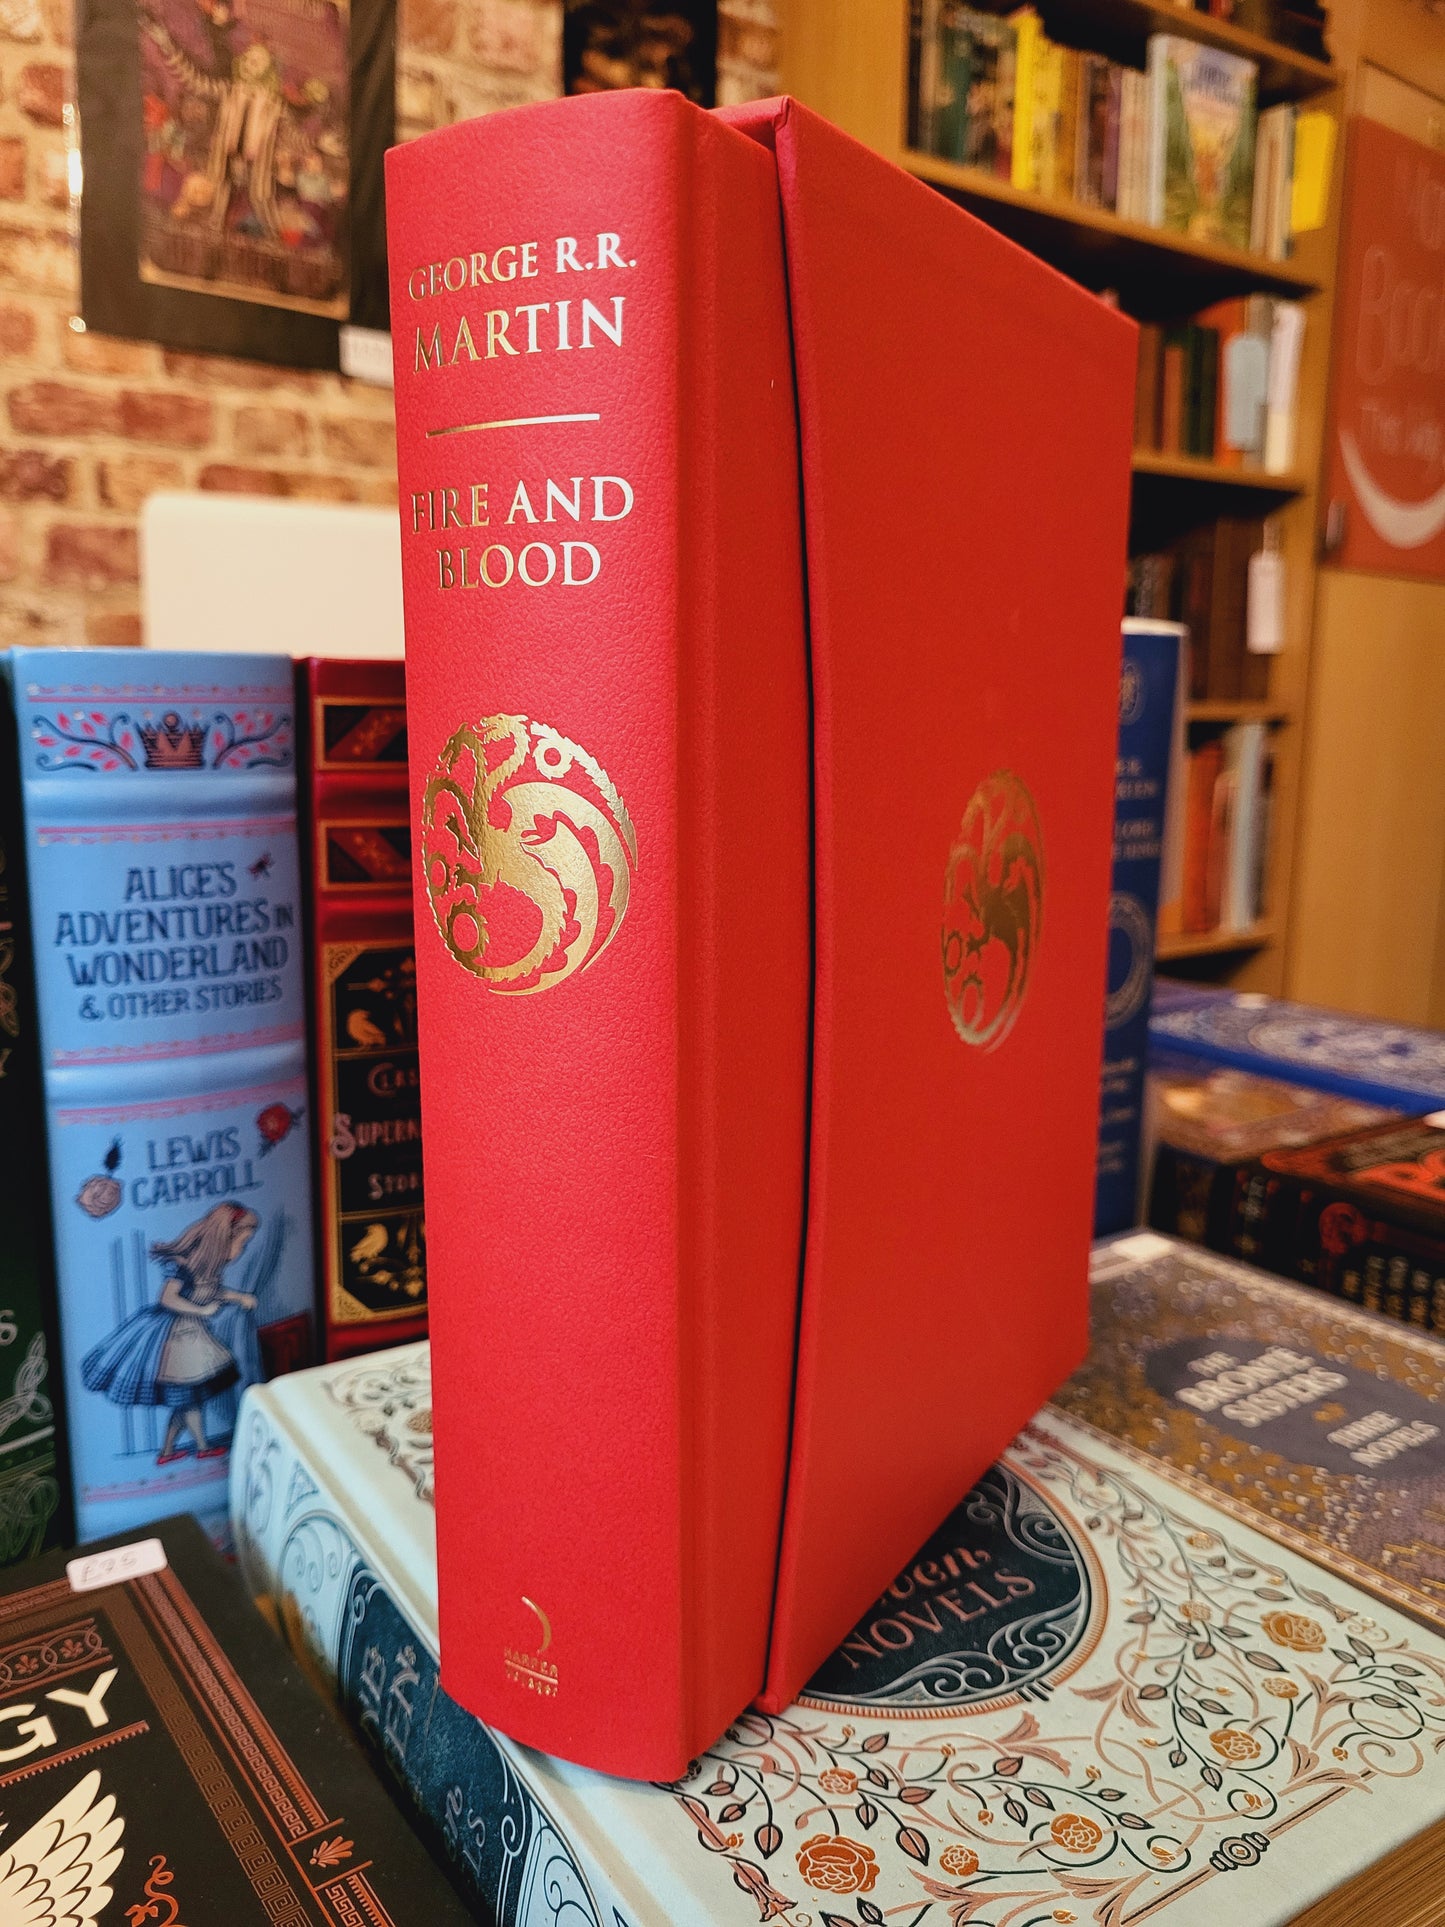 Fire & Blood - George R.R. Martin (Deluxe Slipcase Edition)